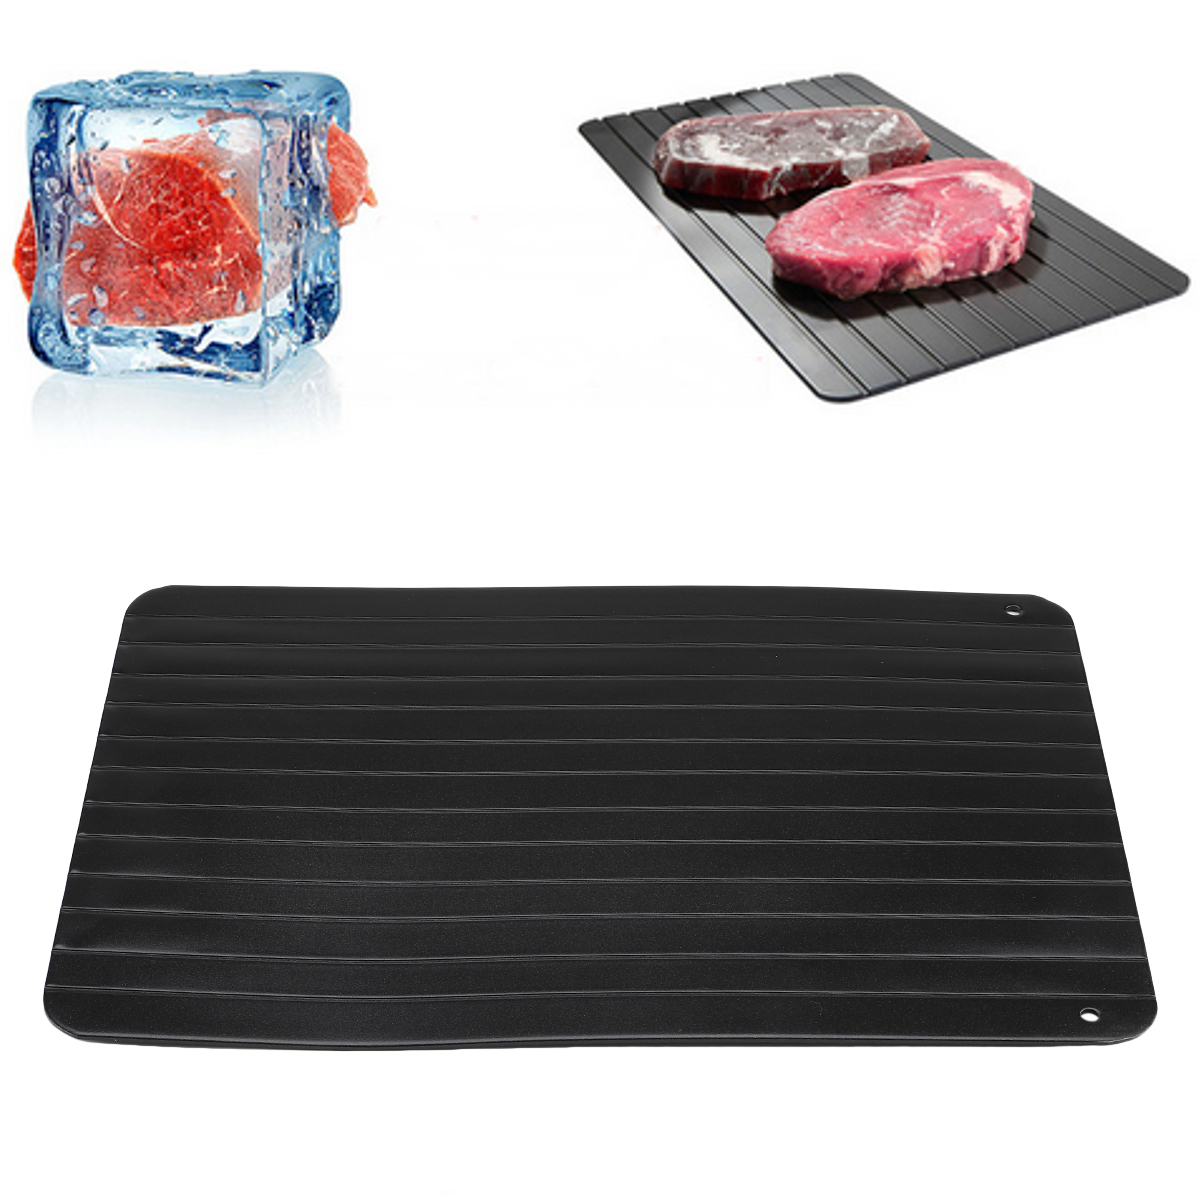 

Fast Defrosting Tray Defrost Meat Thaw Frozen Food Magic Kitchen Defrosting Tray Board